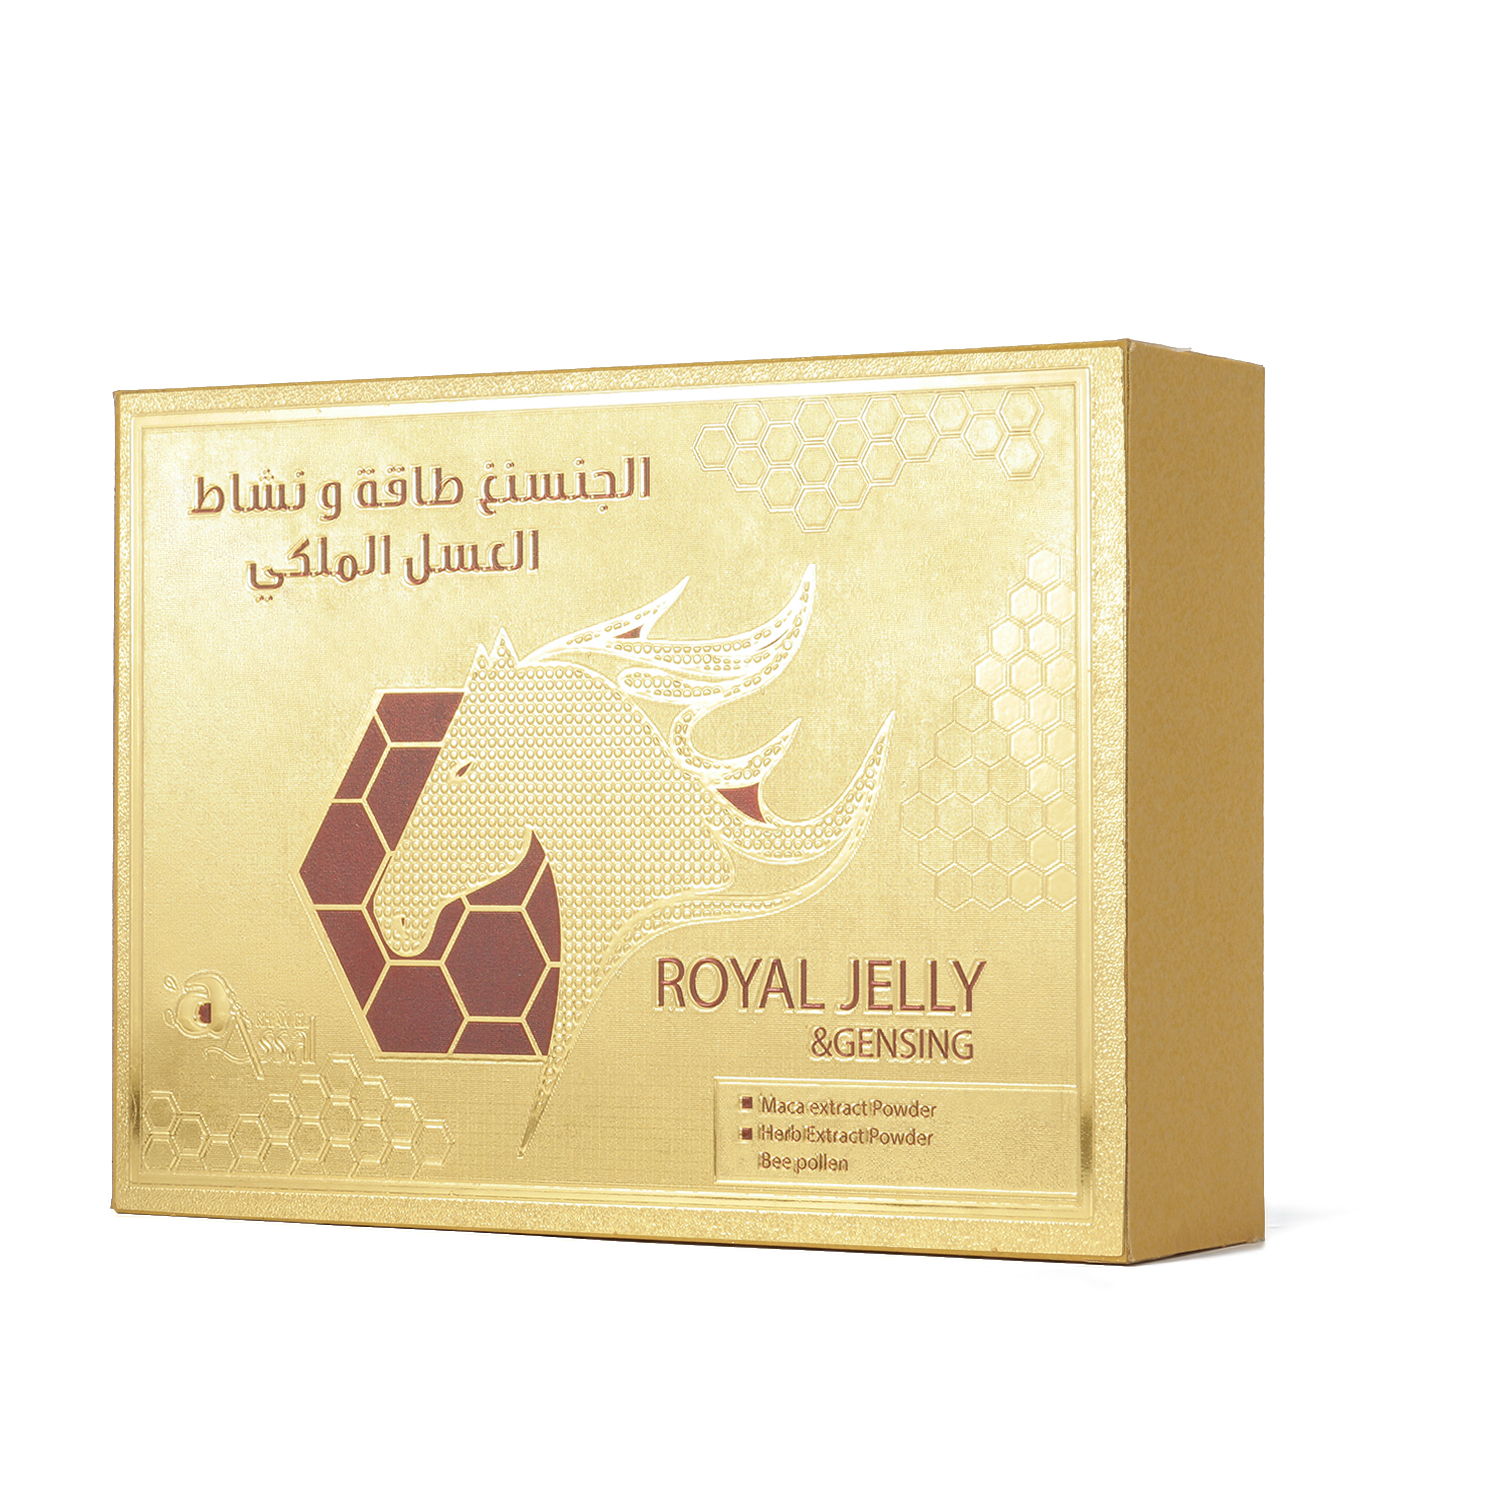 royal jelly horse power gold for him